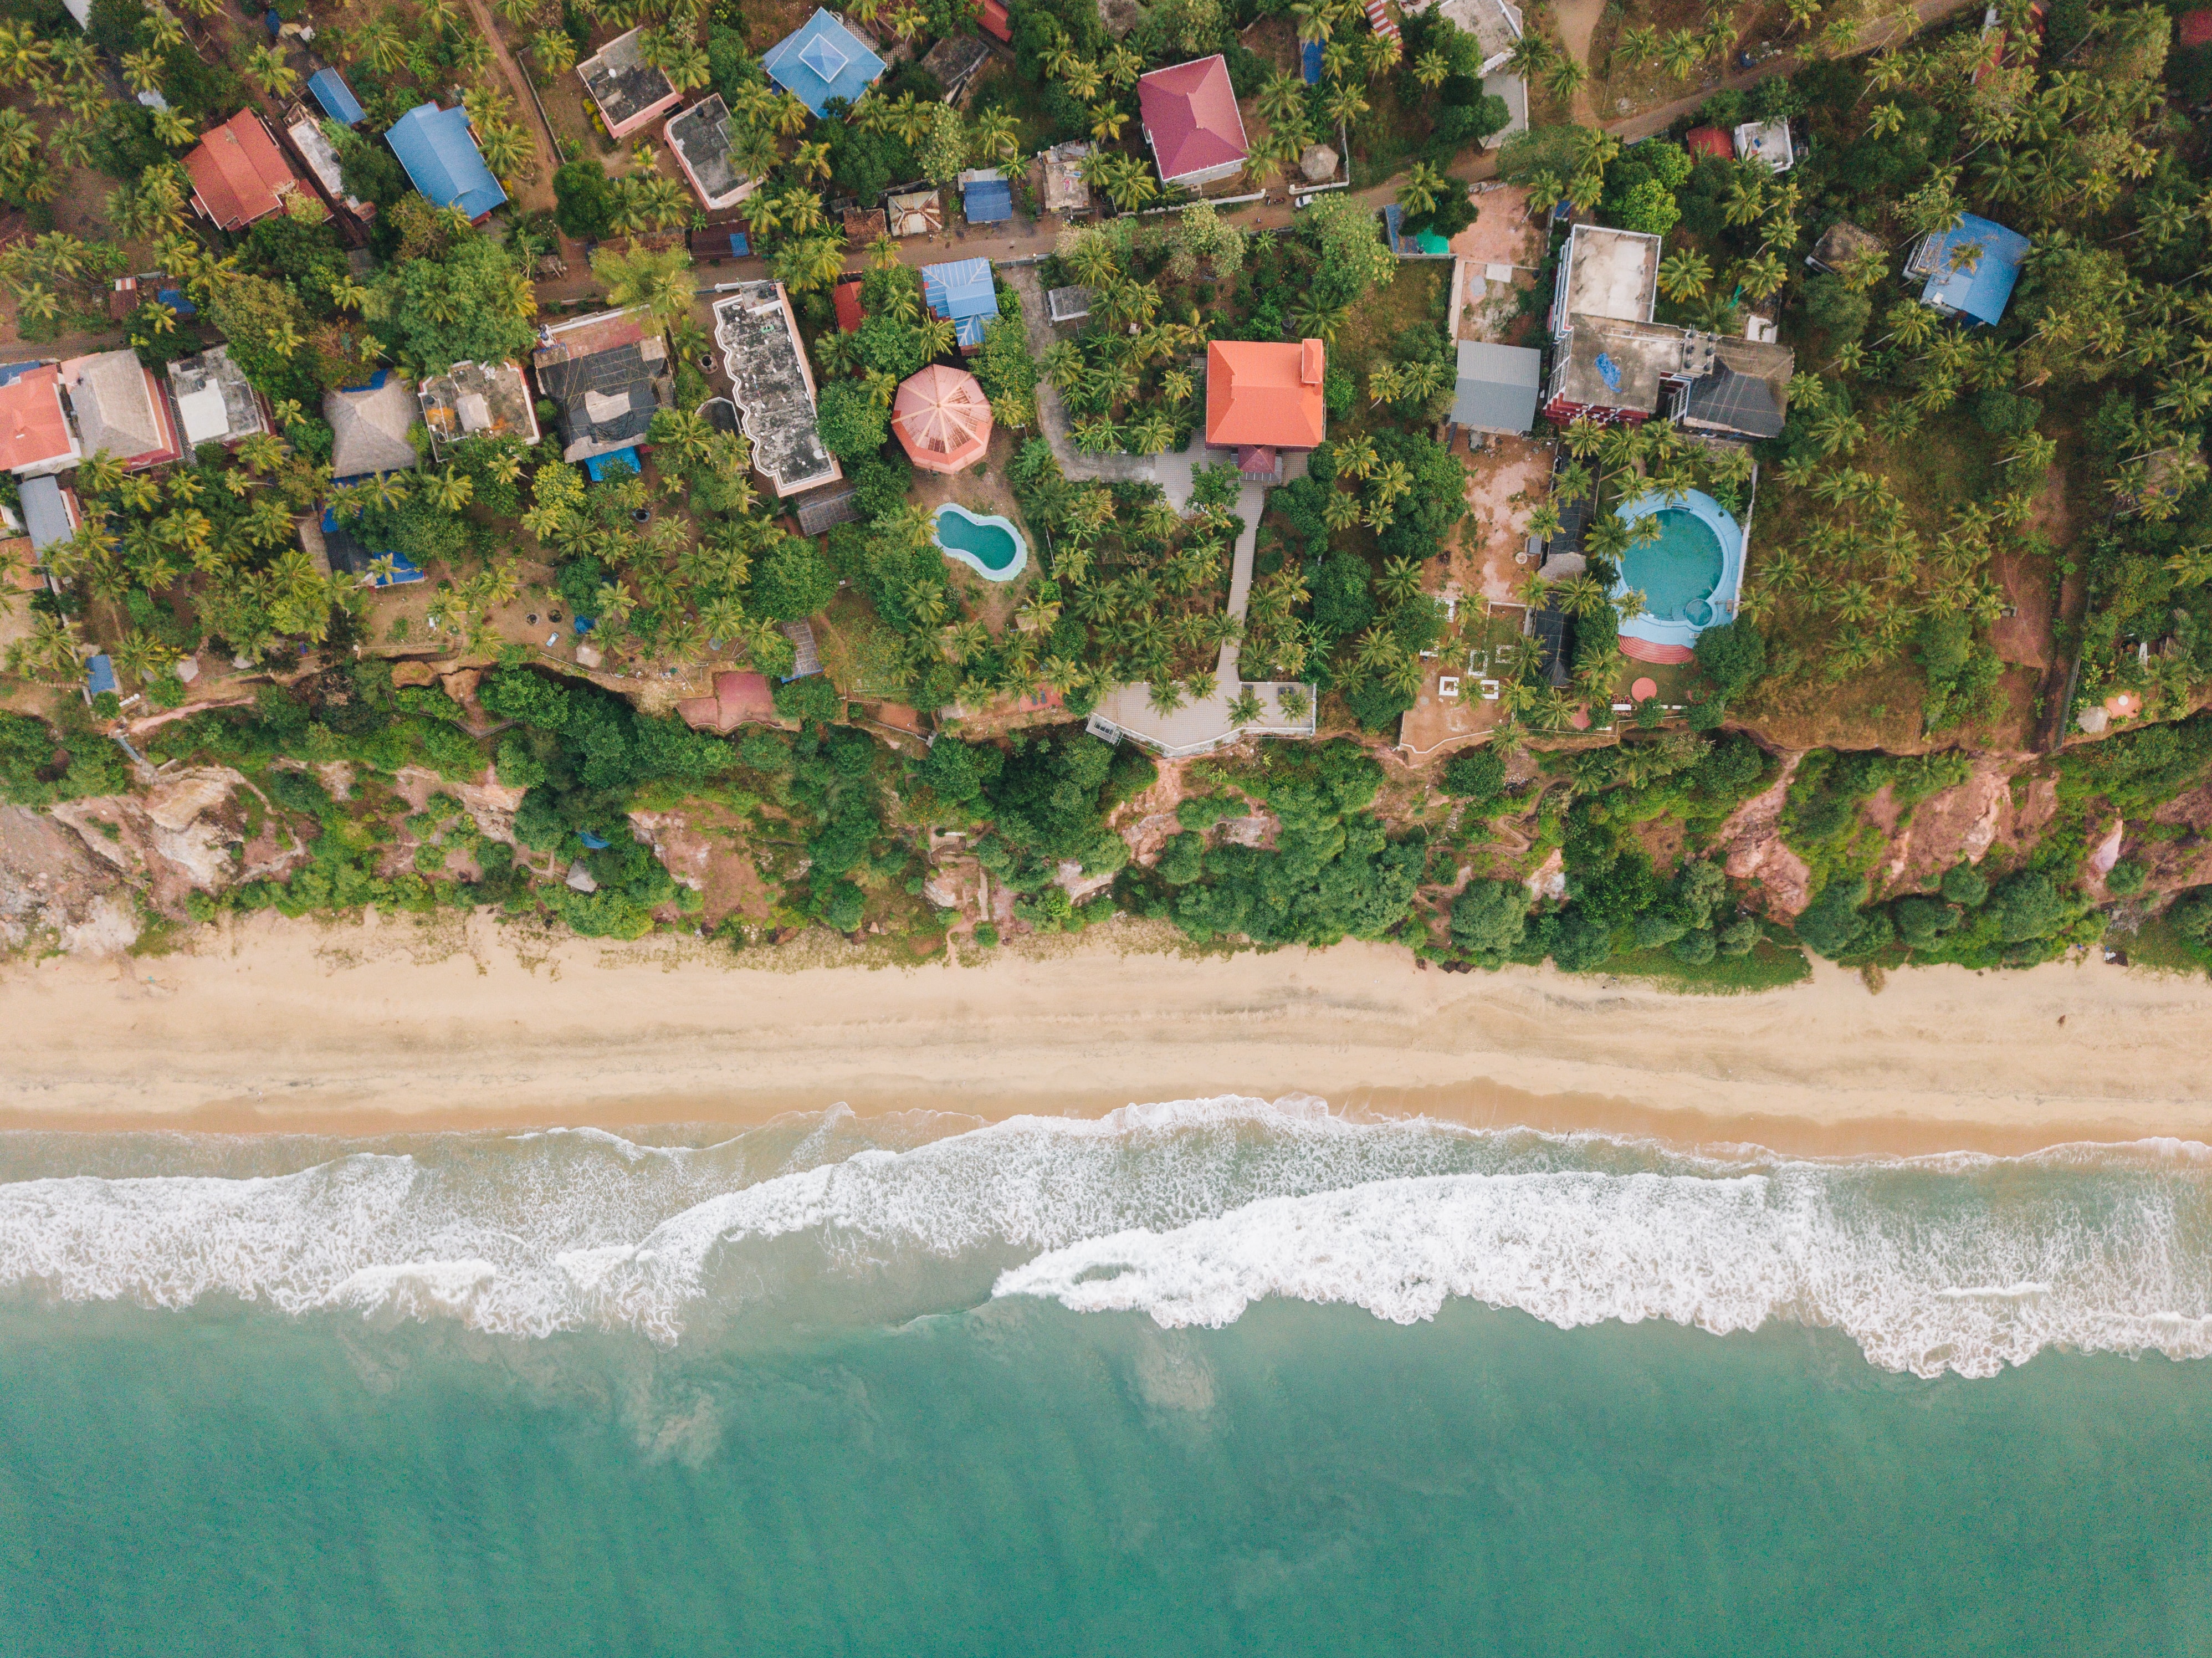 android shore, view from above, nature, beach, palms, building, bank